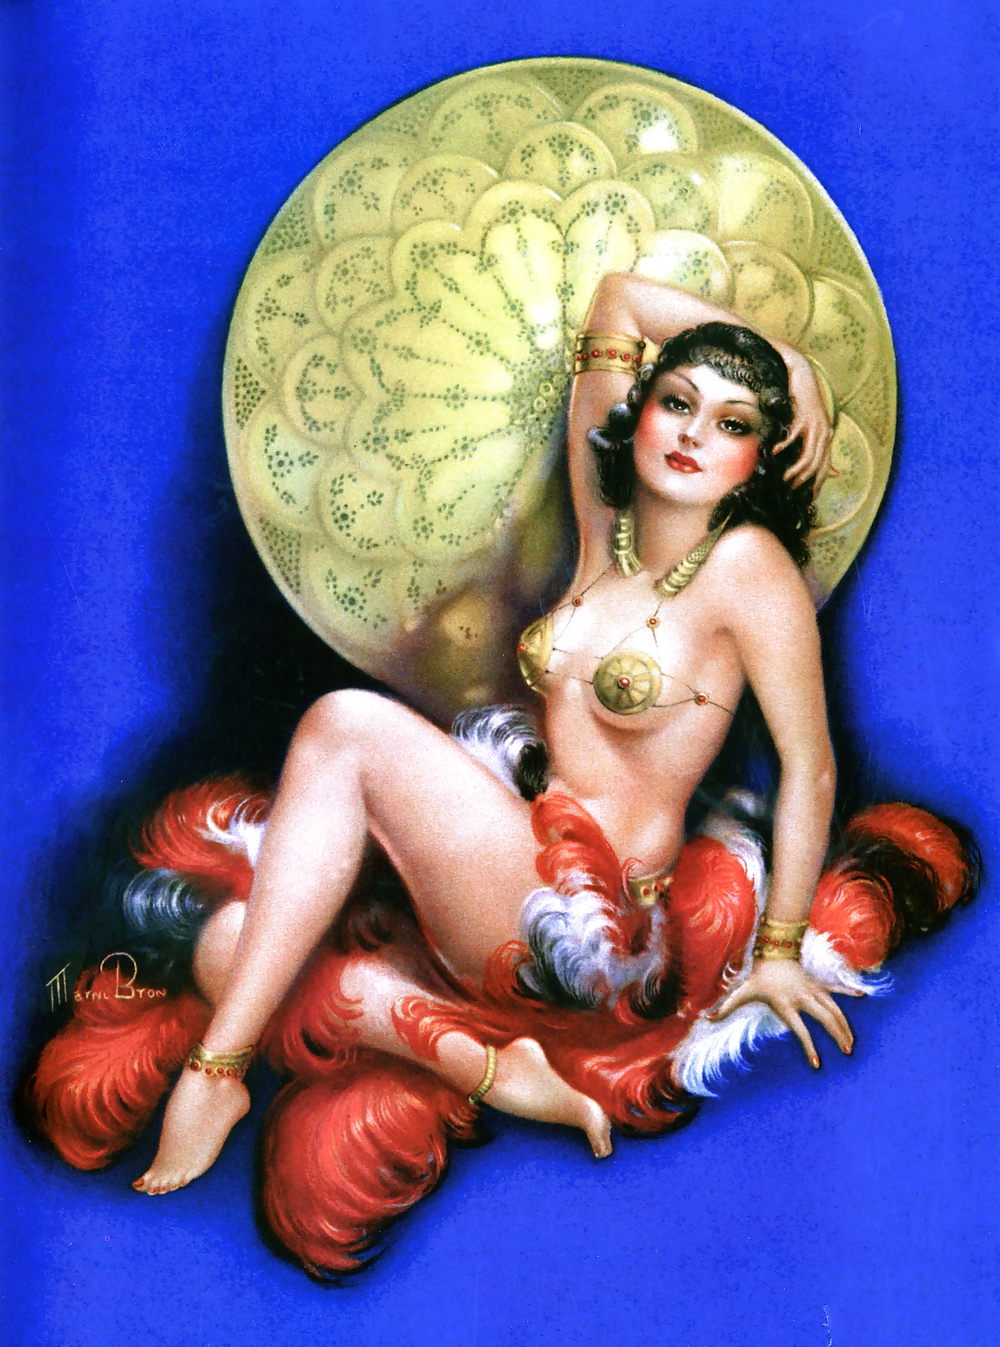 Sexy Vintage Pin - Up Art 2 #6071707